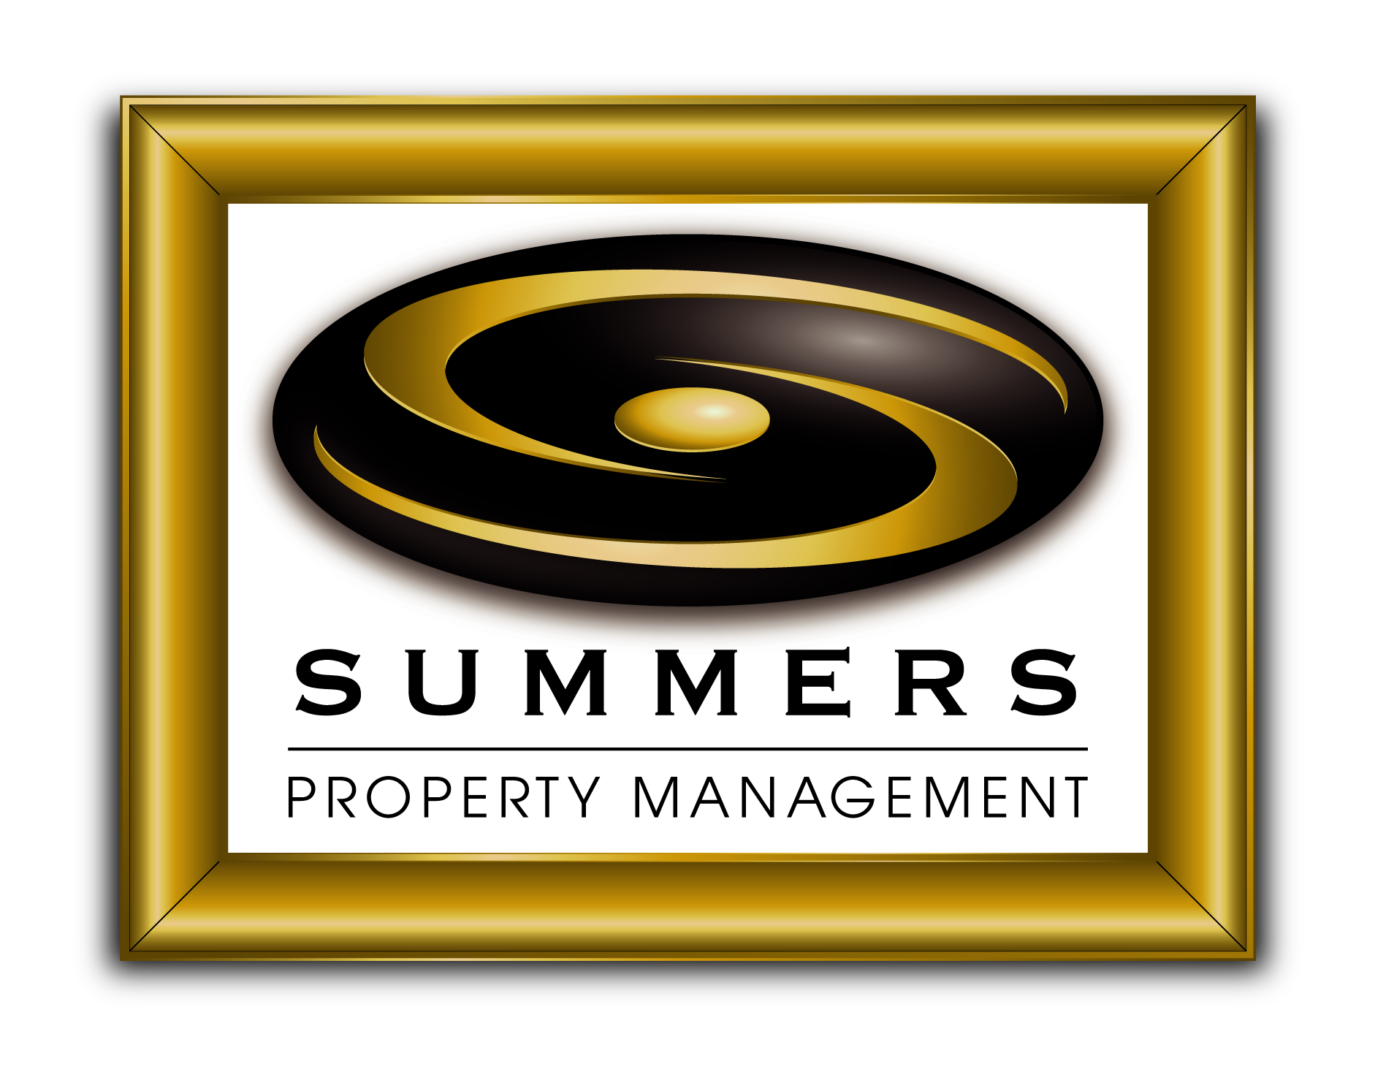 A picture of the logo for summers property management.